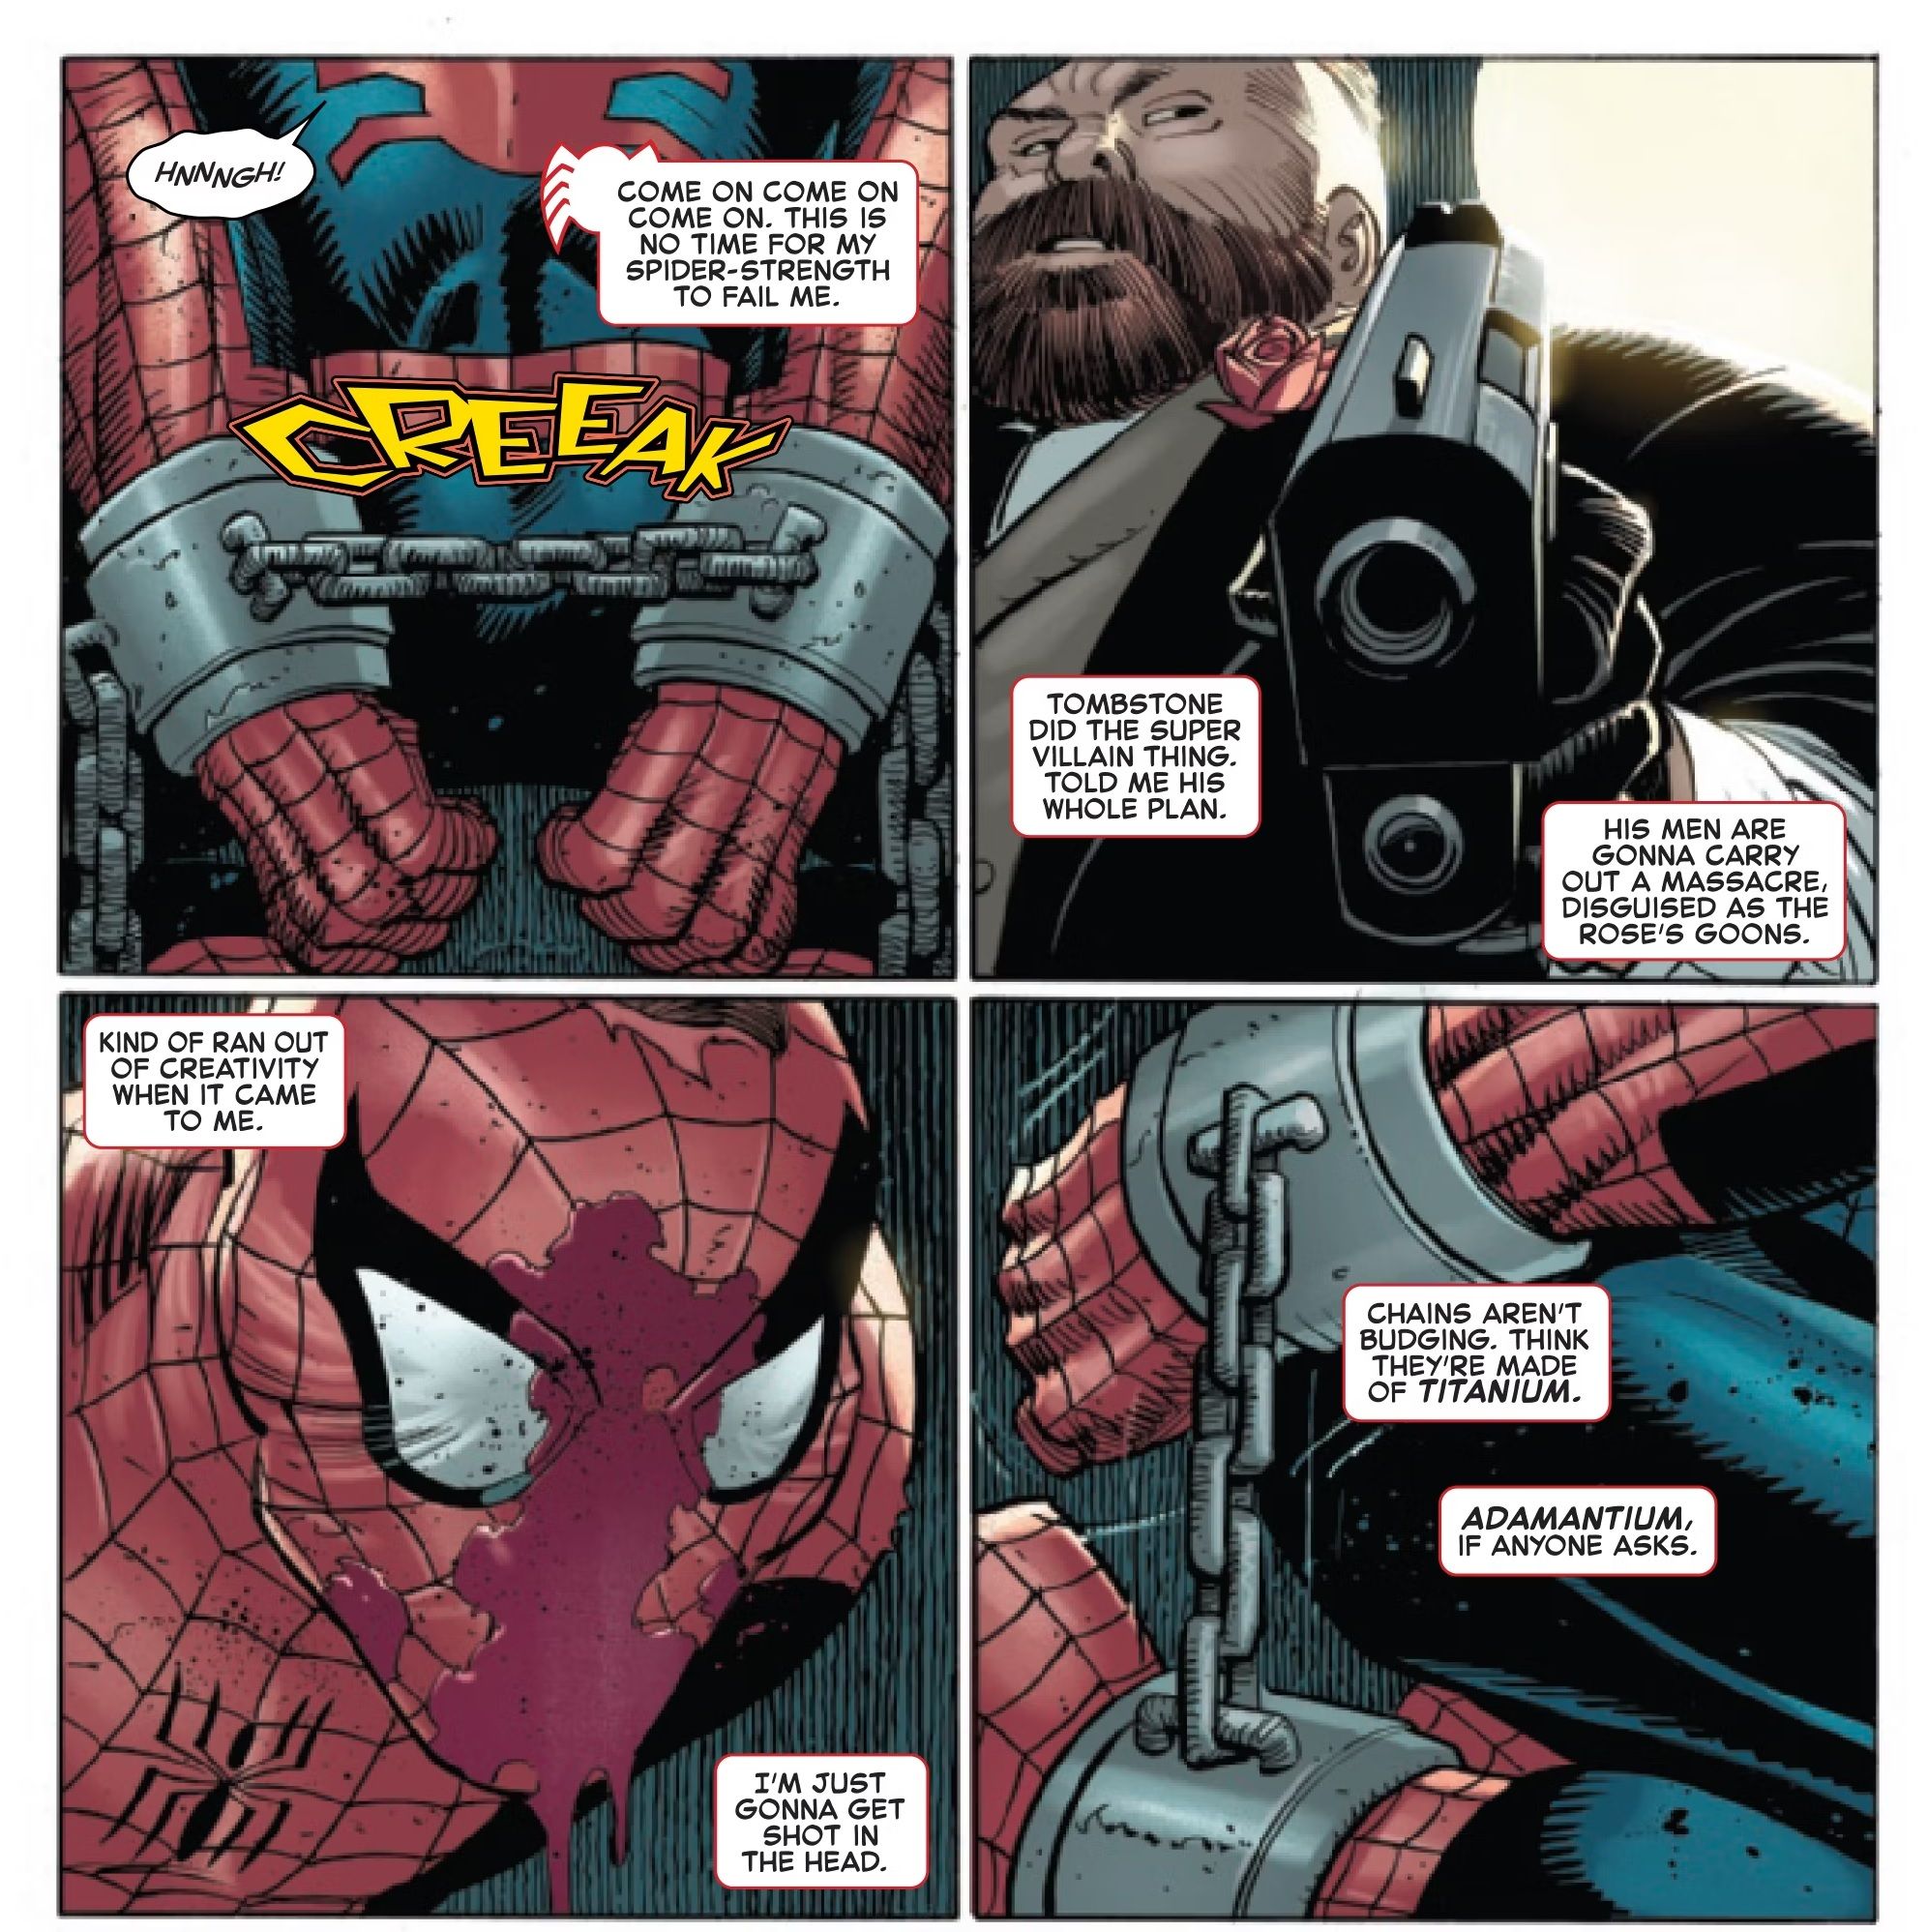 Marvel's Peter Parker Takes on Tombstone in The Amazing Spider-Man #4